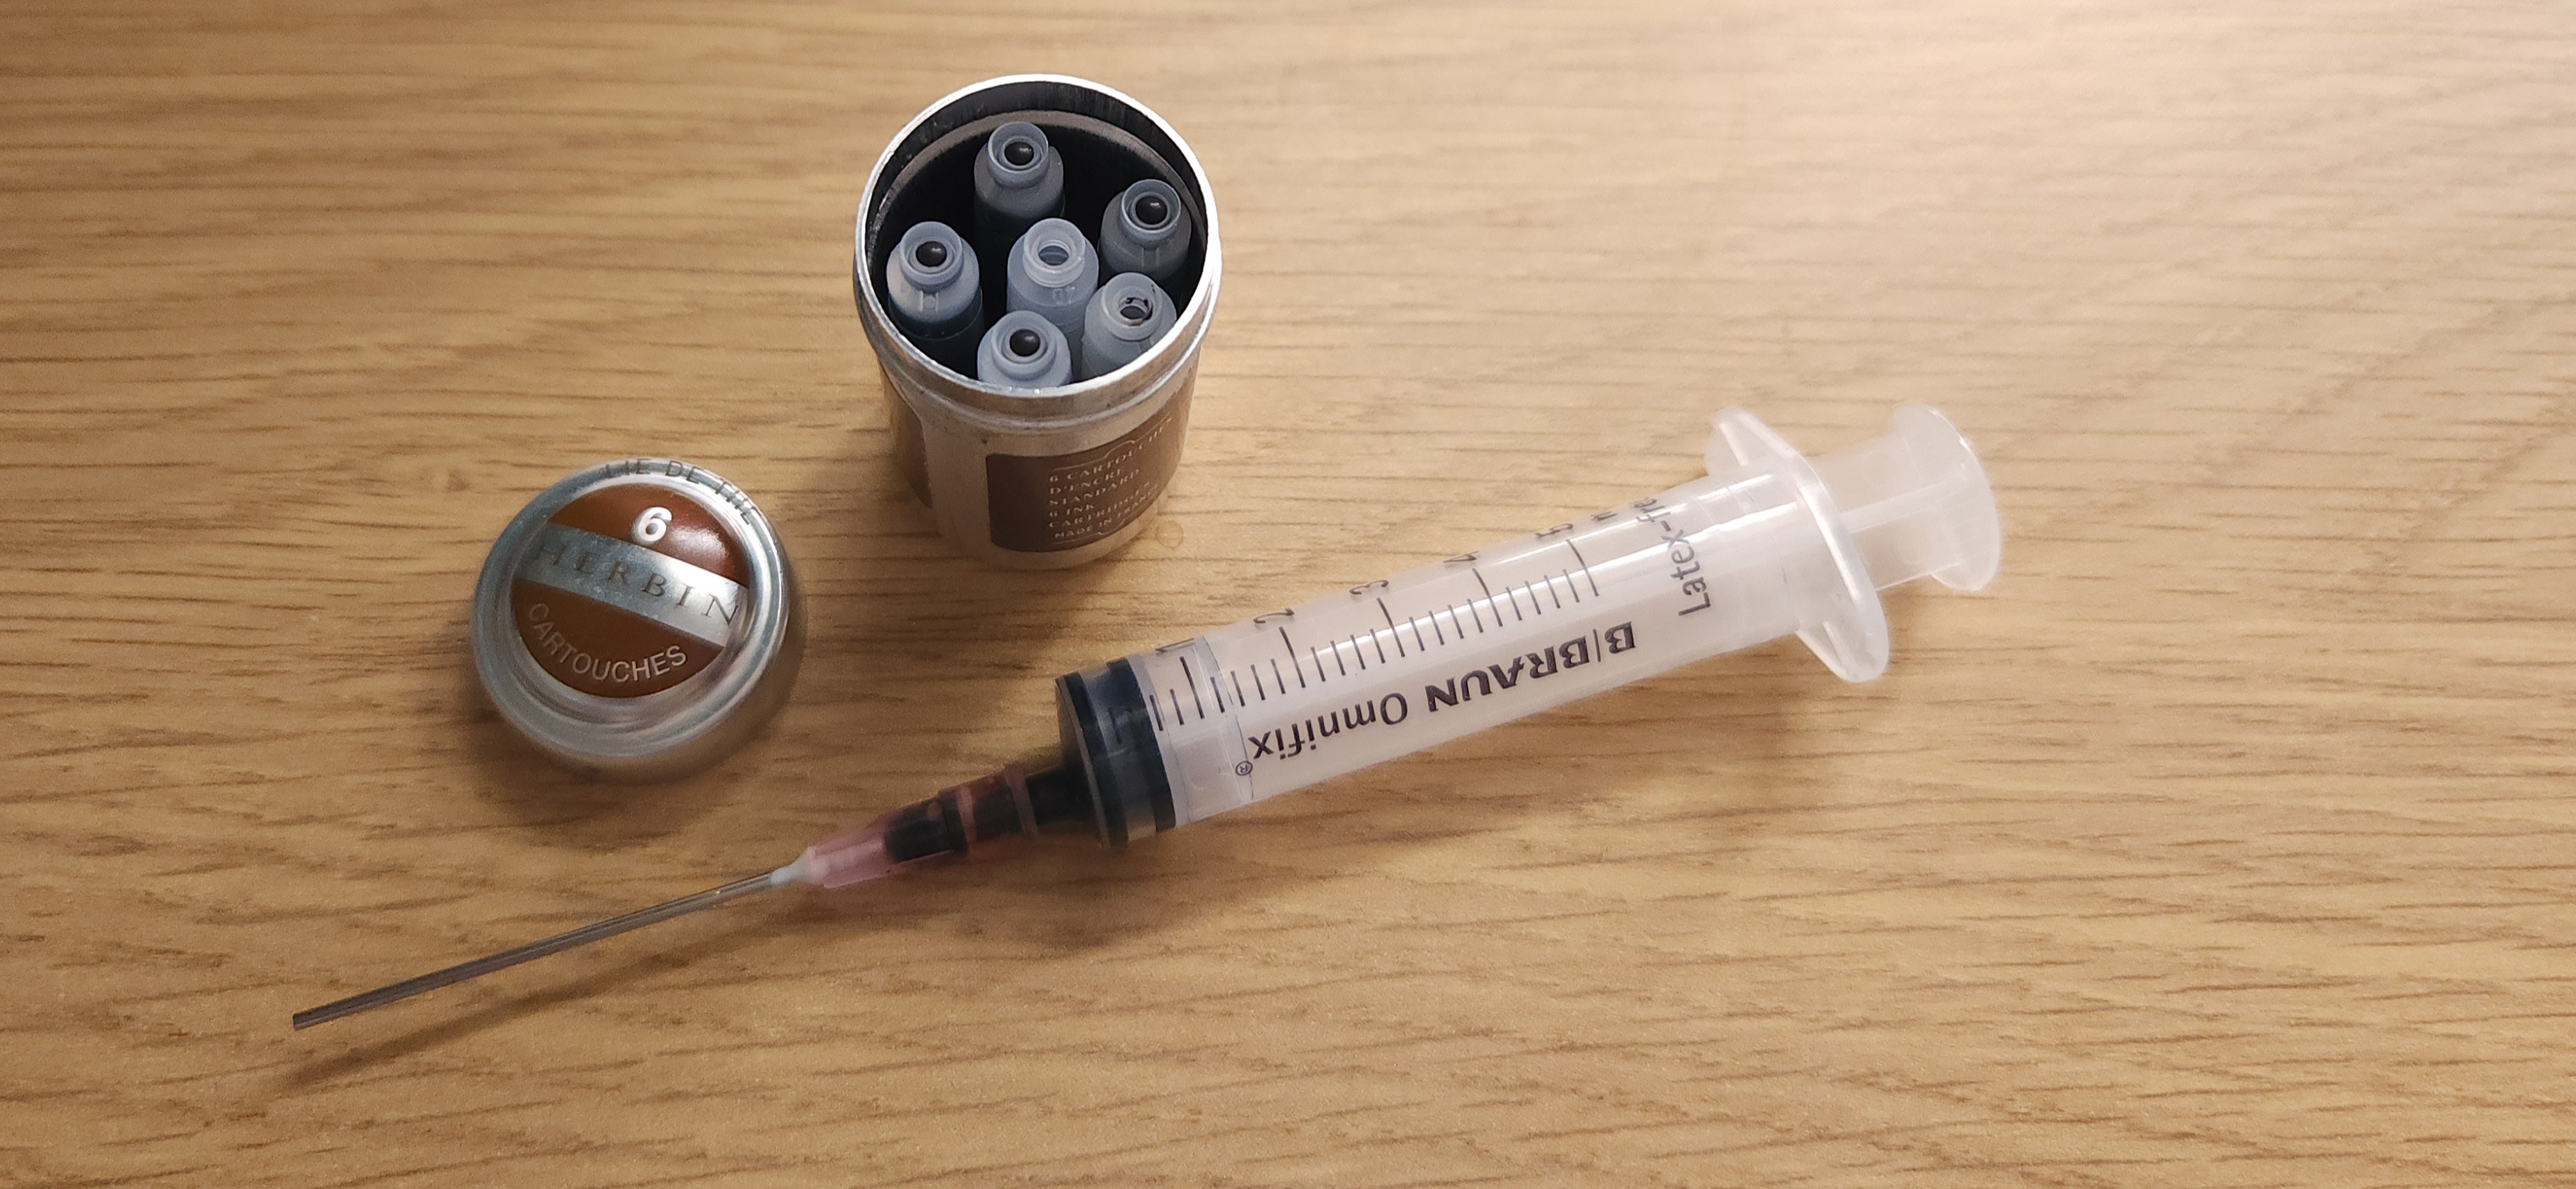 The canister, plus the blunt syringe I use to get ink out of the cartridges so I can put it in incompatible pens.